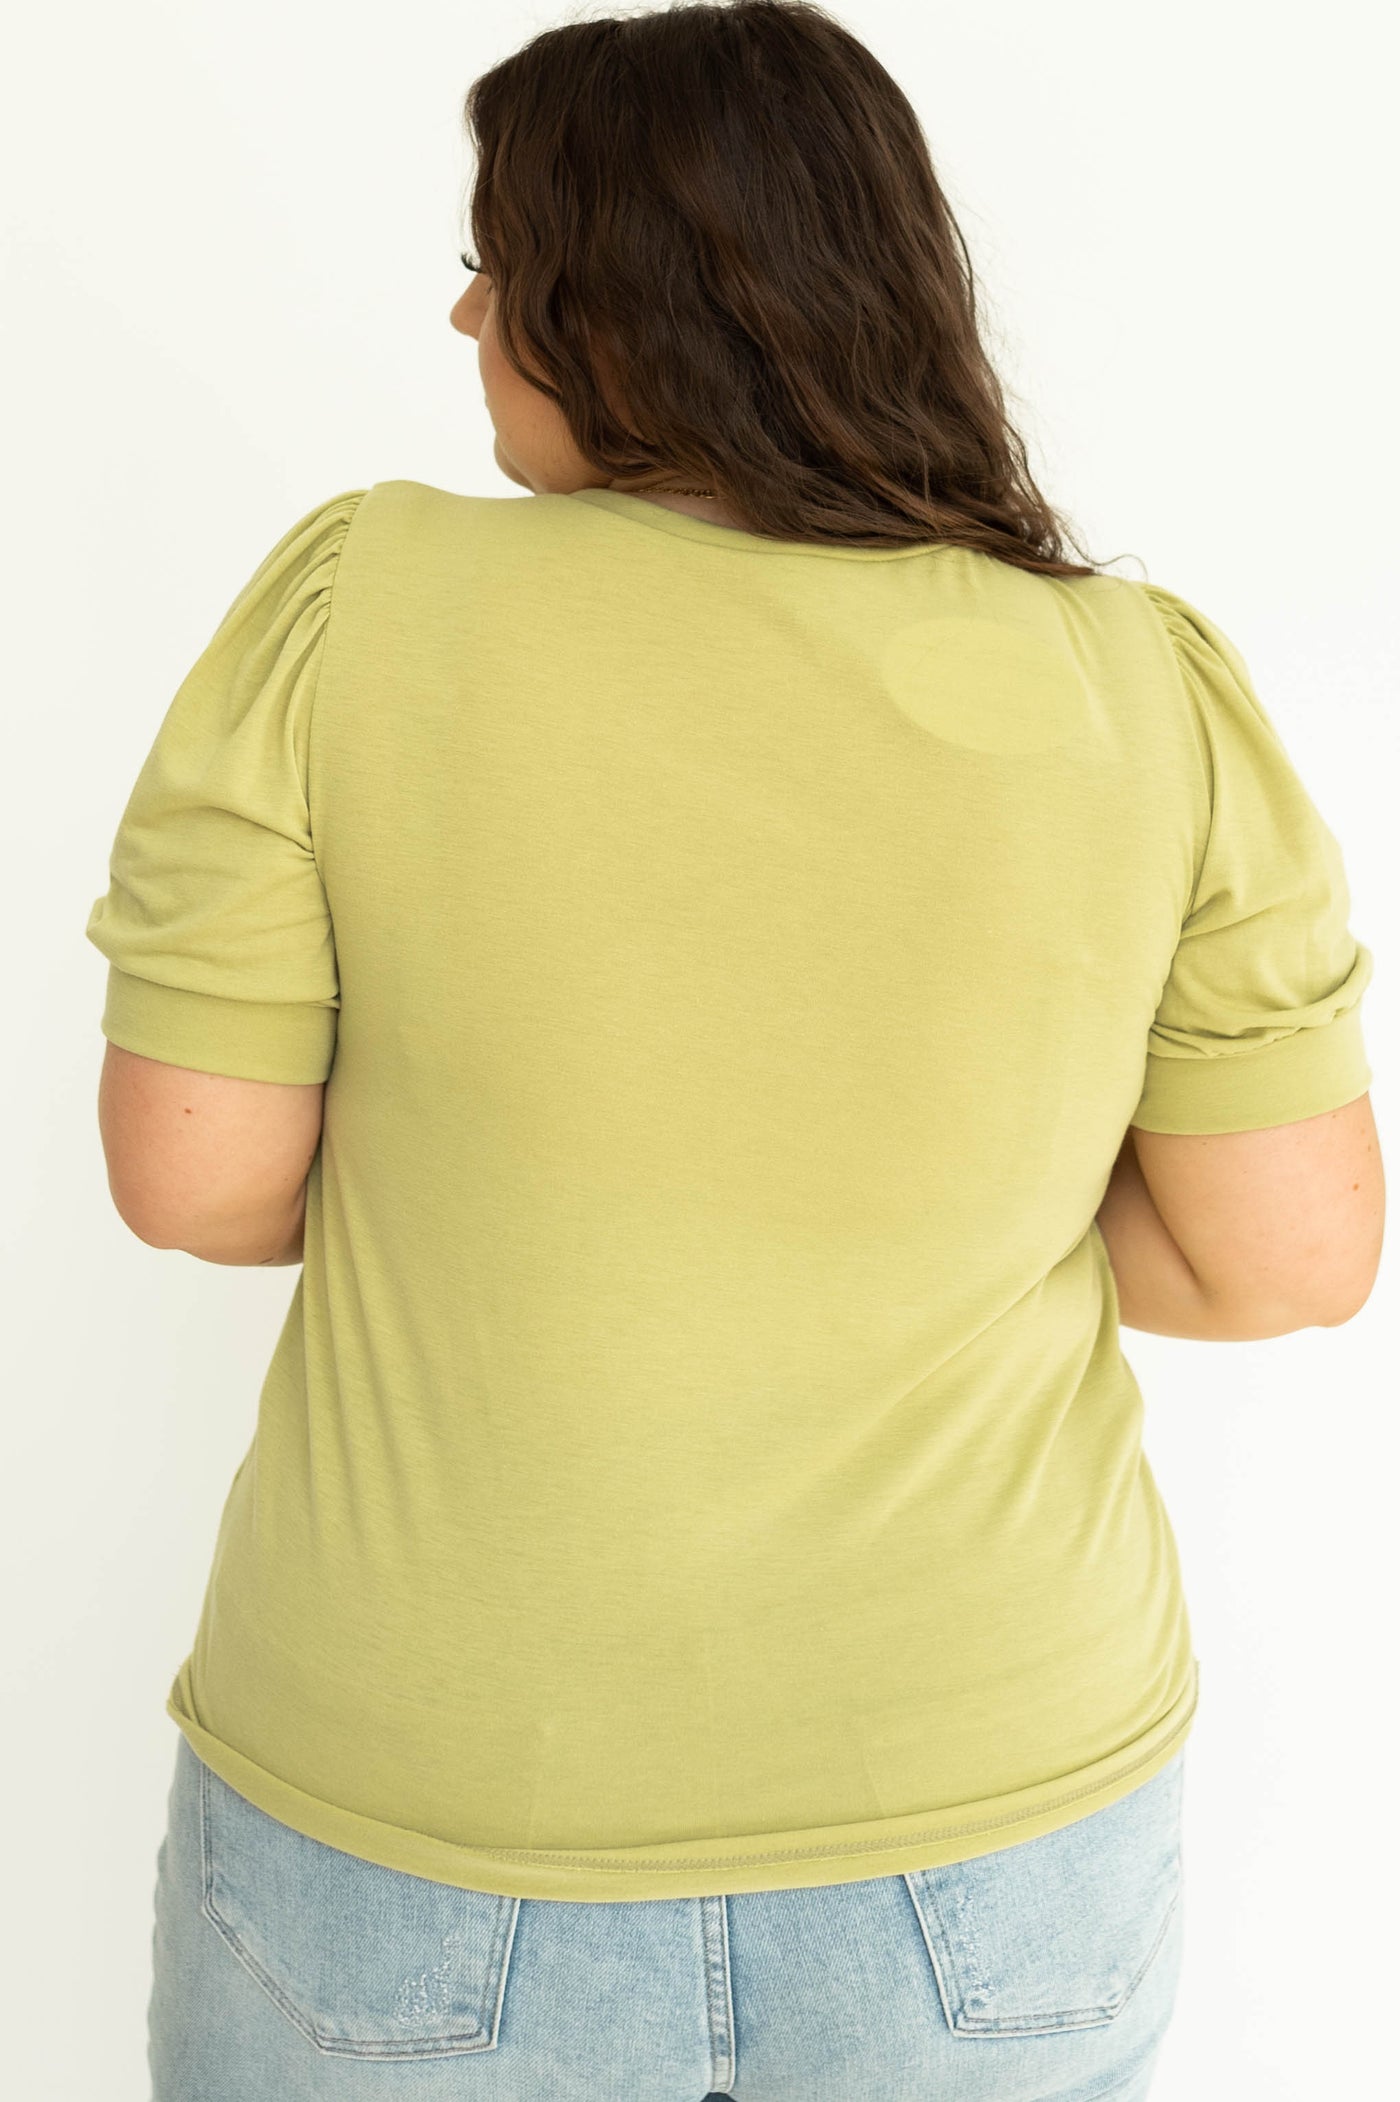 Back view of a plus size kiwi colored knit top.